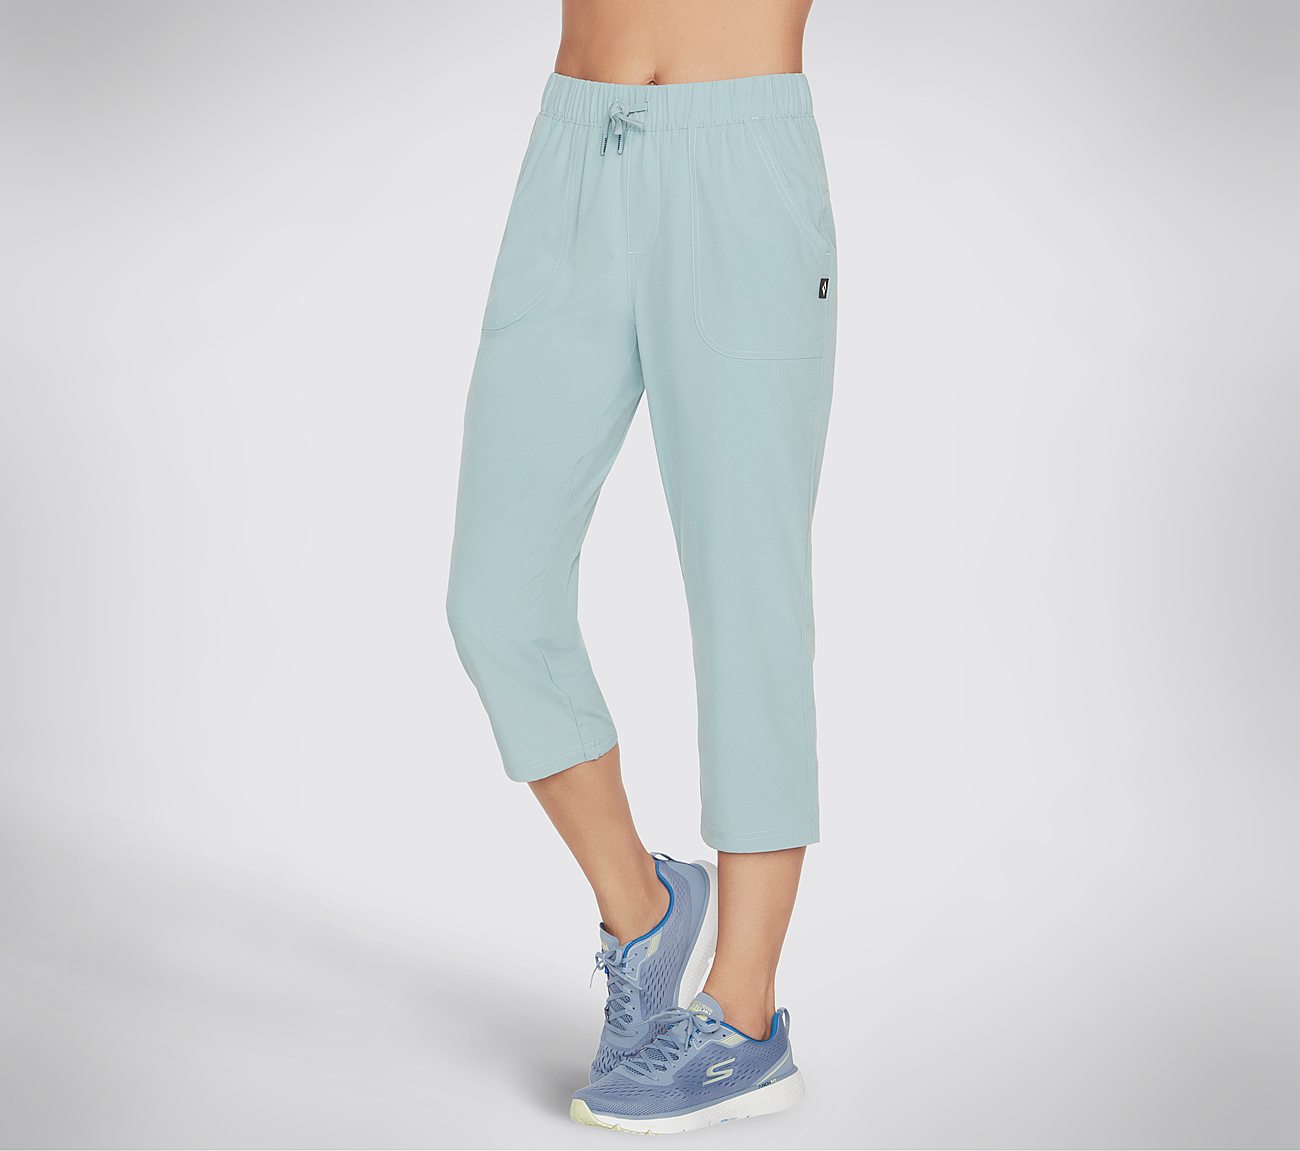 Skechers Incline Midcalf Pant, Light Blue Loose Pant For Women